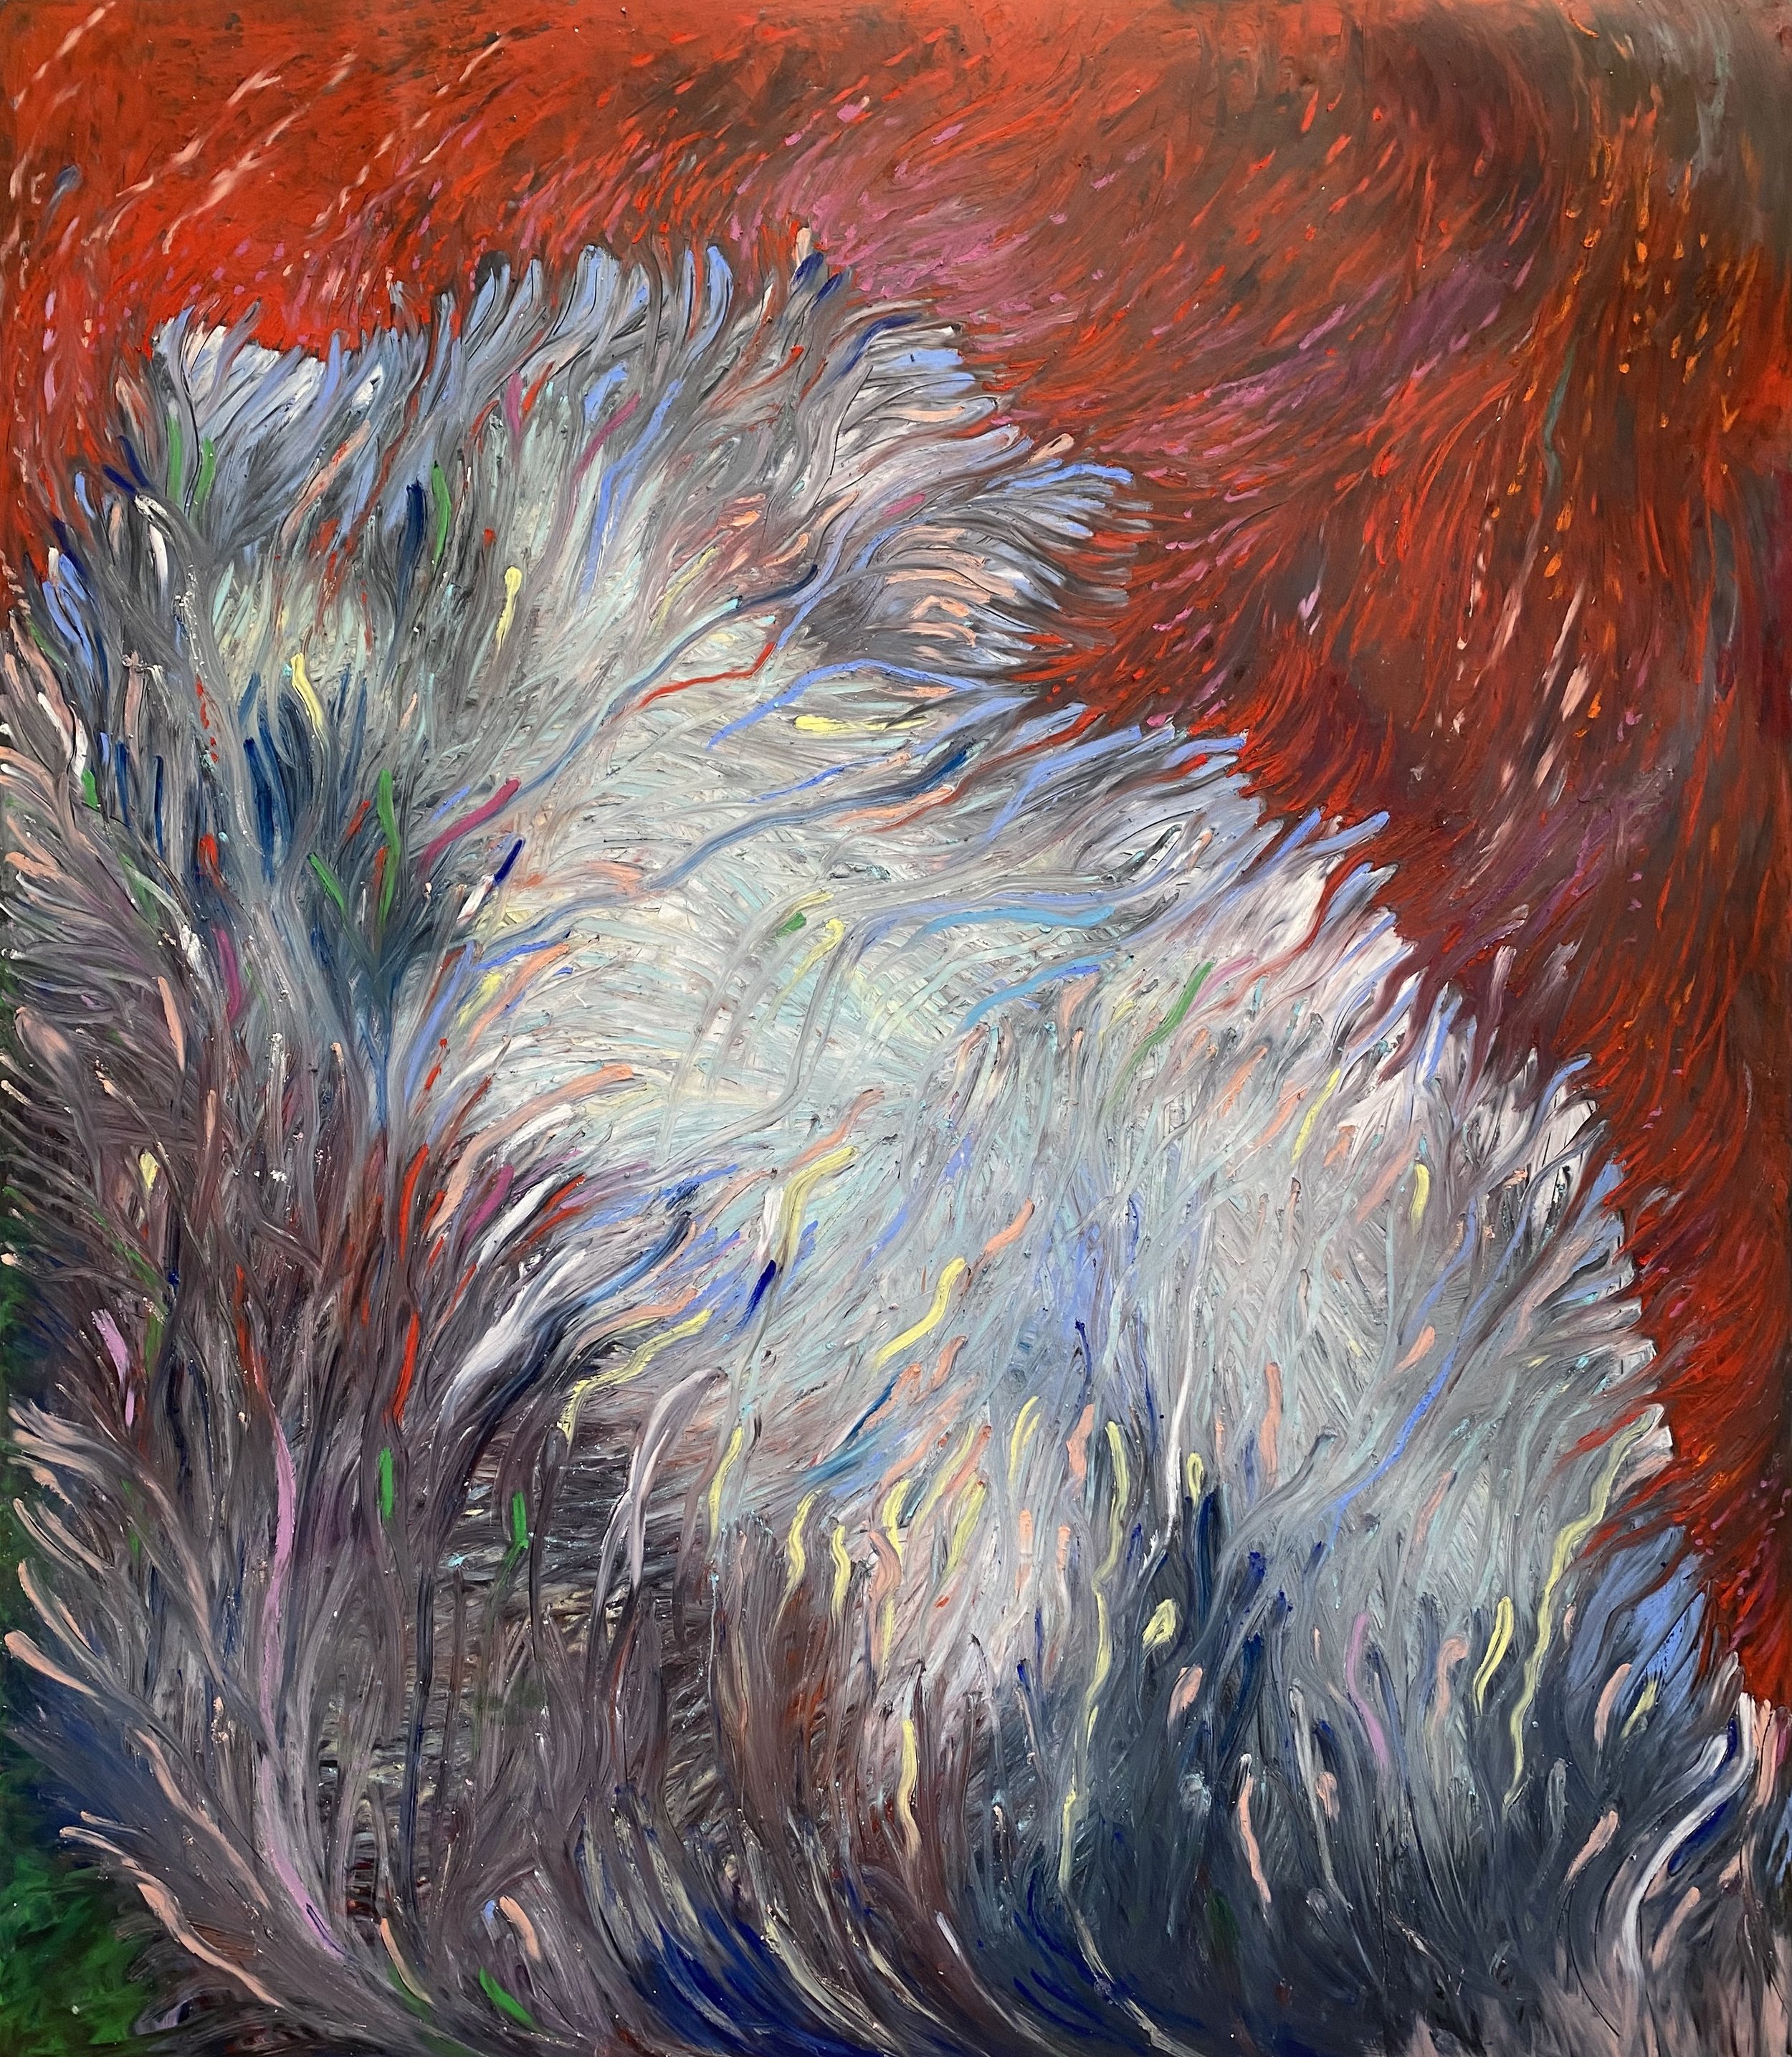  Mountain of fall, 2020  Oil pastel on mylar  42x36 inches 